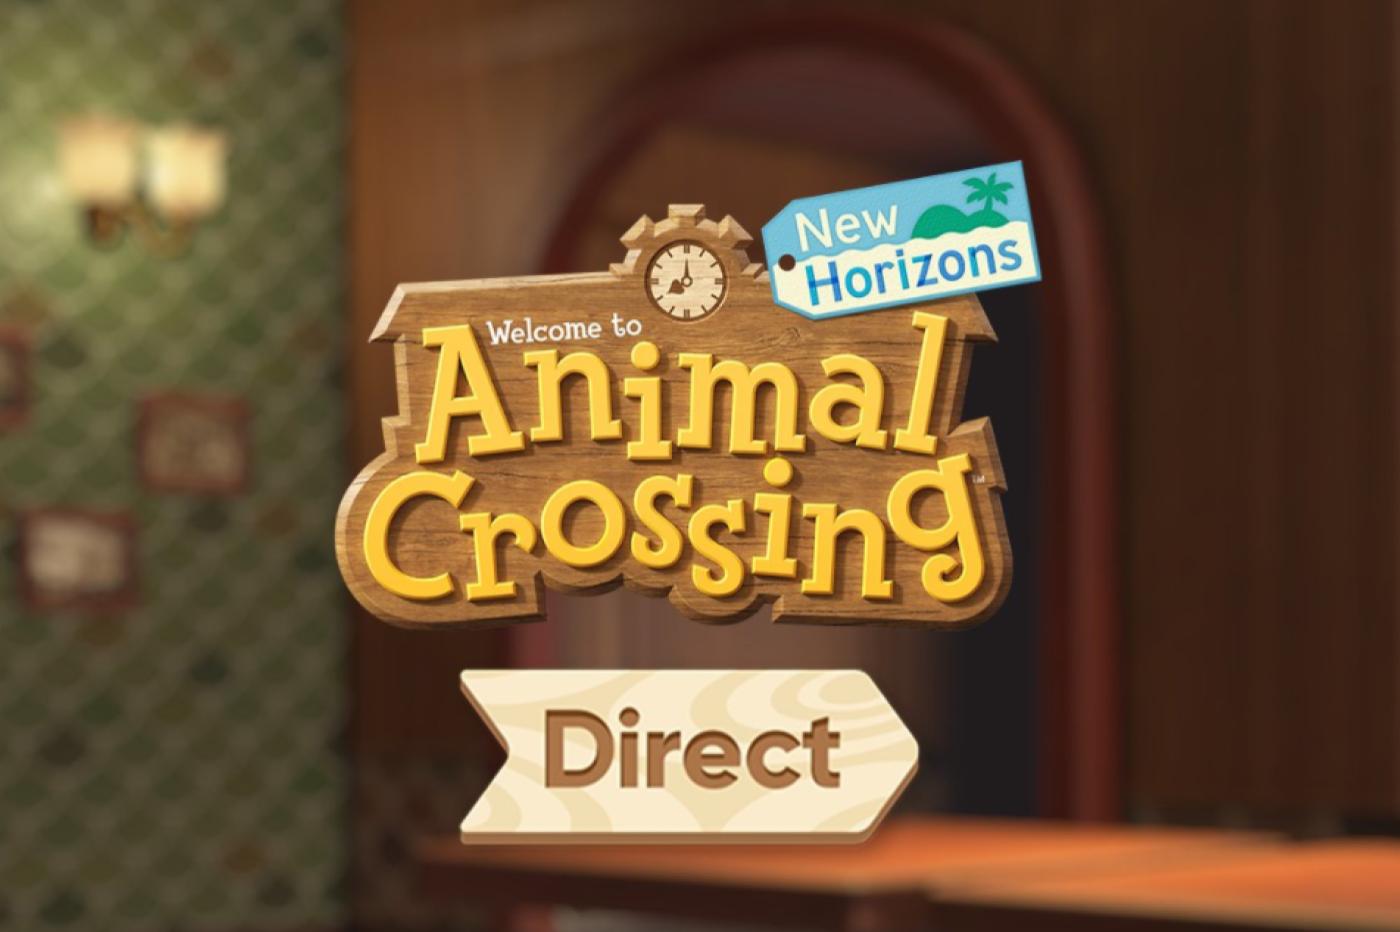 Animal crossing direct mise a jour robusto